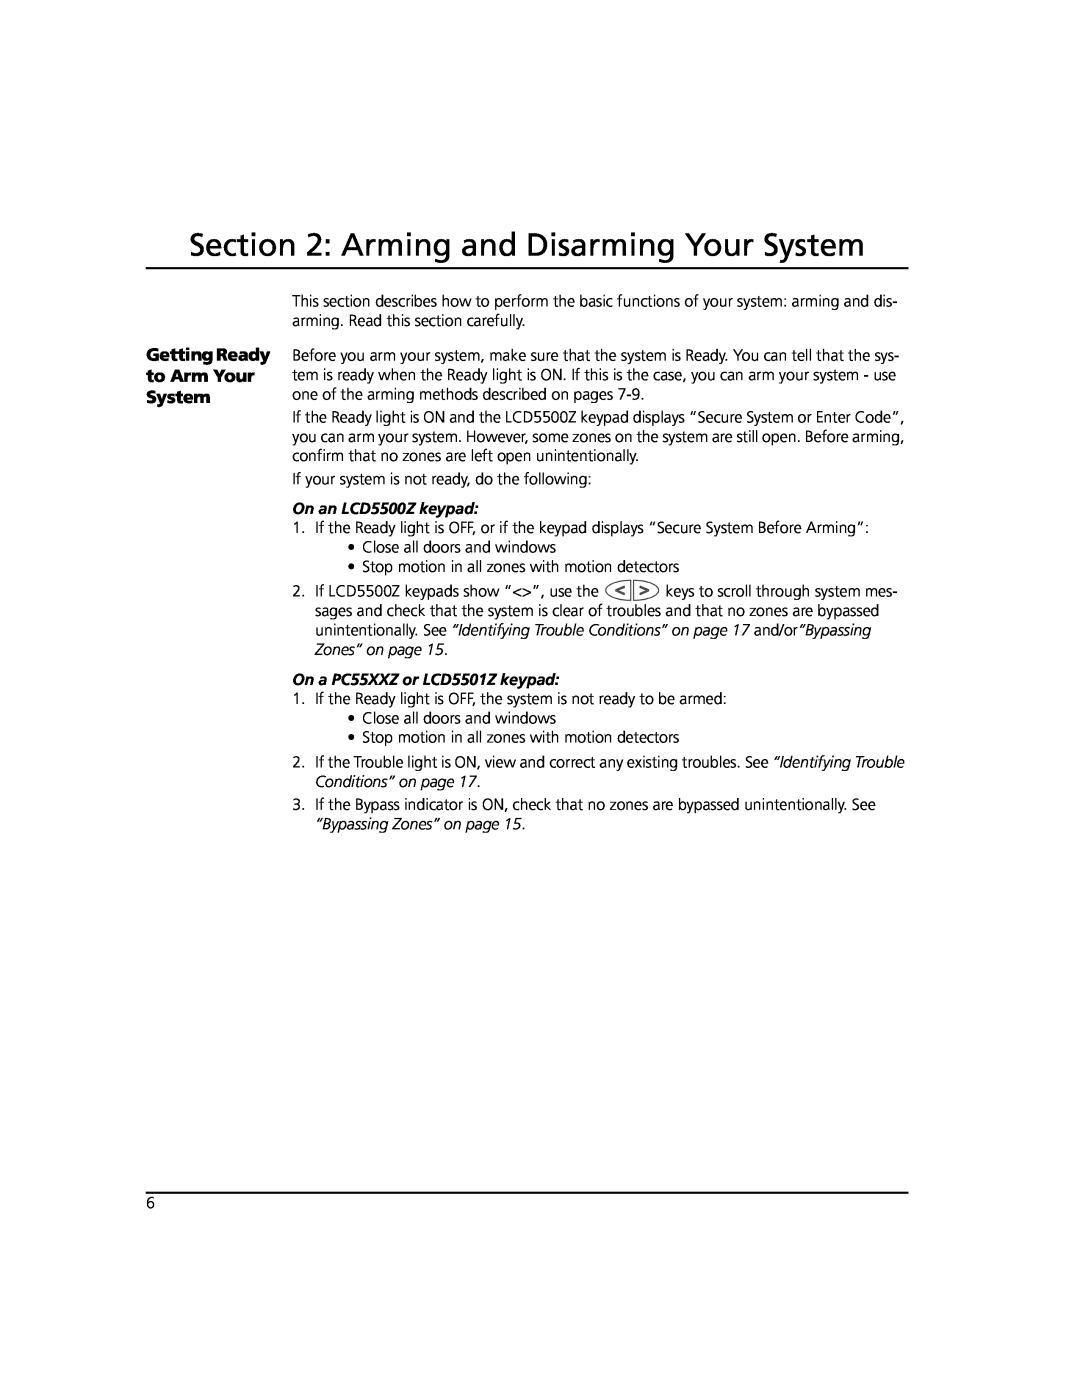 ADT Security Services Power 864 manual Arming and Disarming Your System, Getting Ready to Arm Your System 